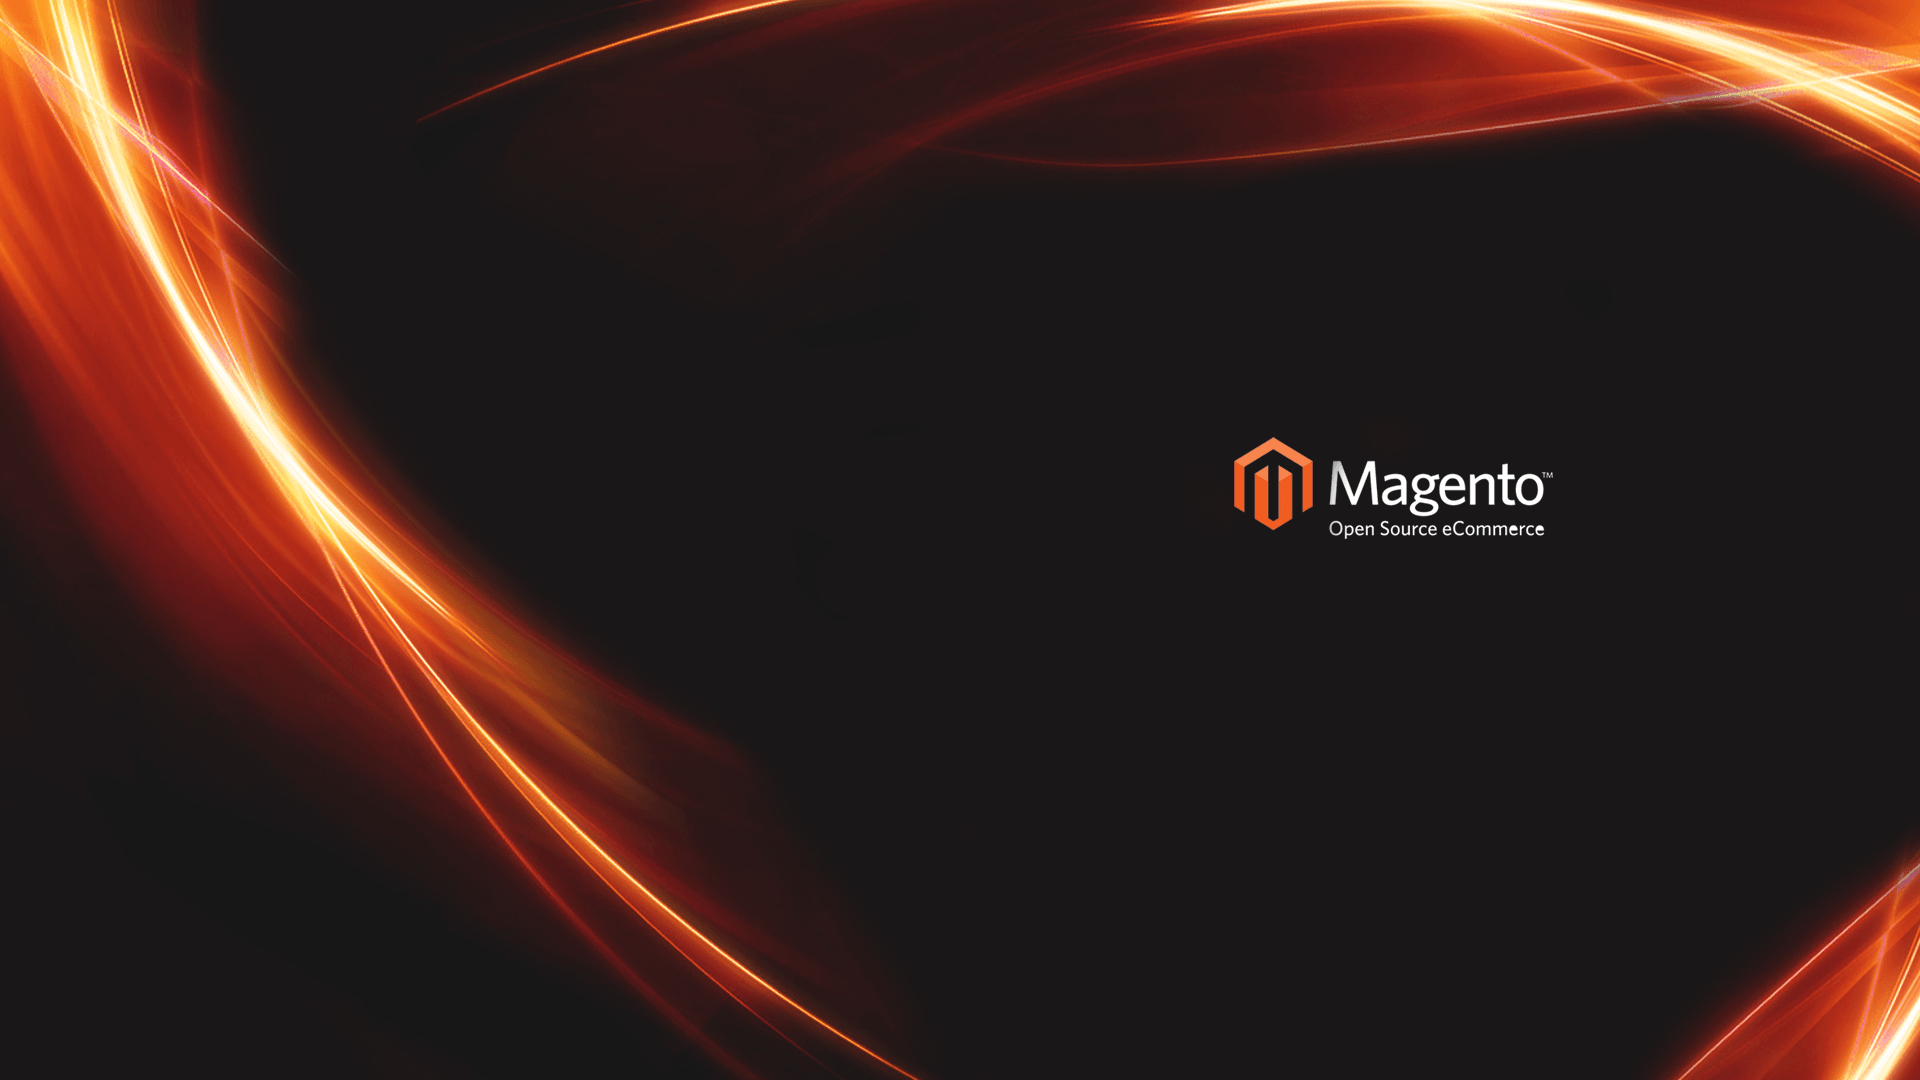 Magento wallpaper pack from Amasty